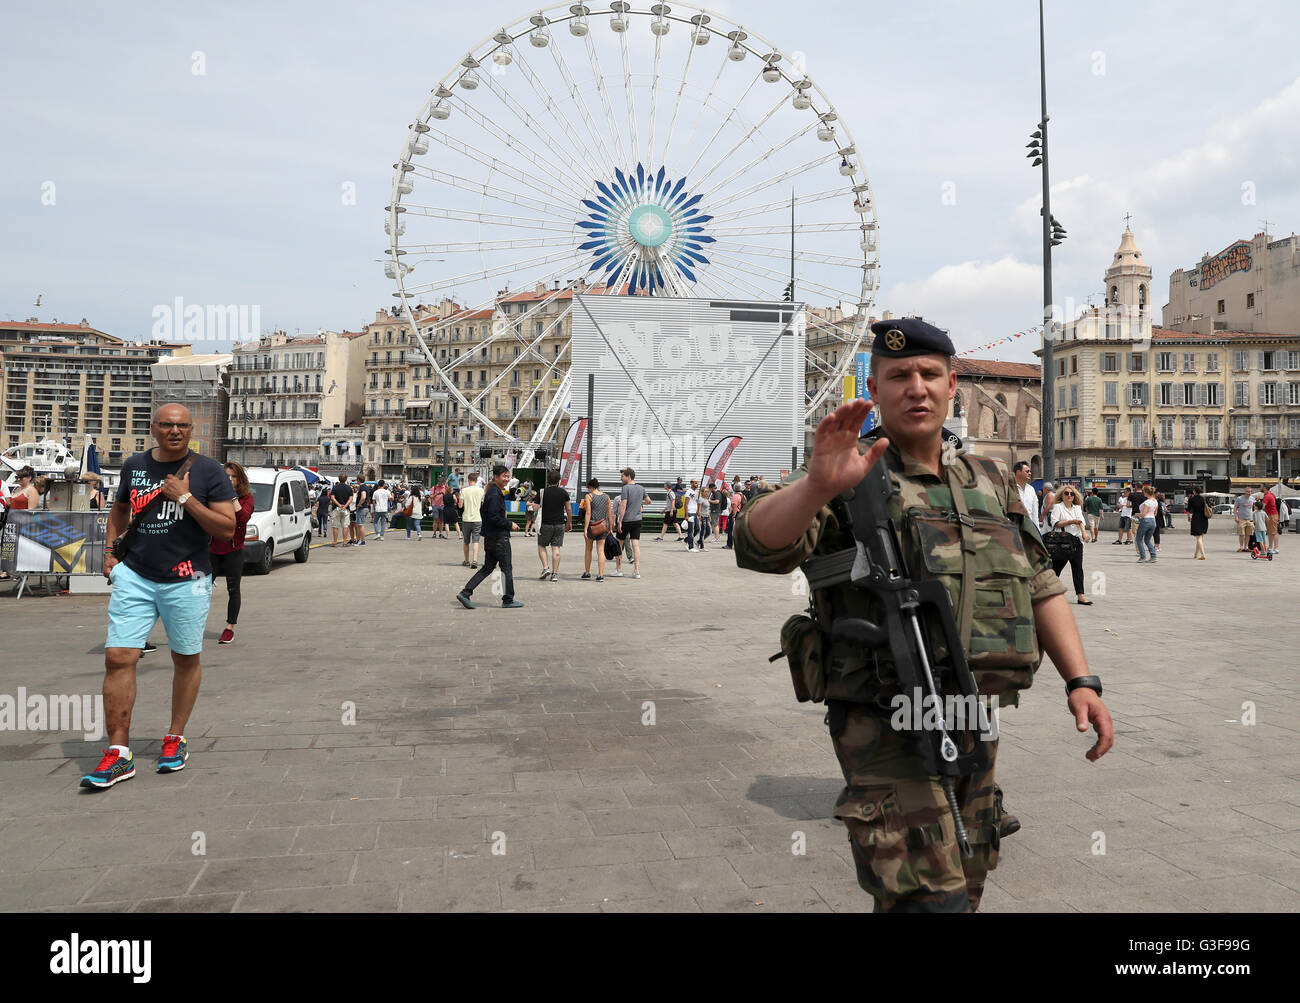 Security in Marseille ahead of the UEFA Euro 2016, Group B match at the Stade Velodrome, Marseille. PRESS ASSOCIATION Photo. Picture date: Saturday June 11, 2016. See PA story SOCCER England. Photo credit should read: Owen Humphreys/PA Wire. Stock Photo